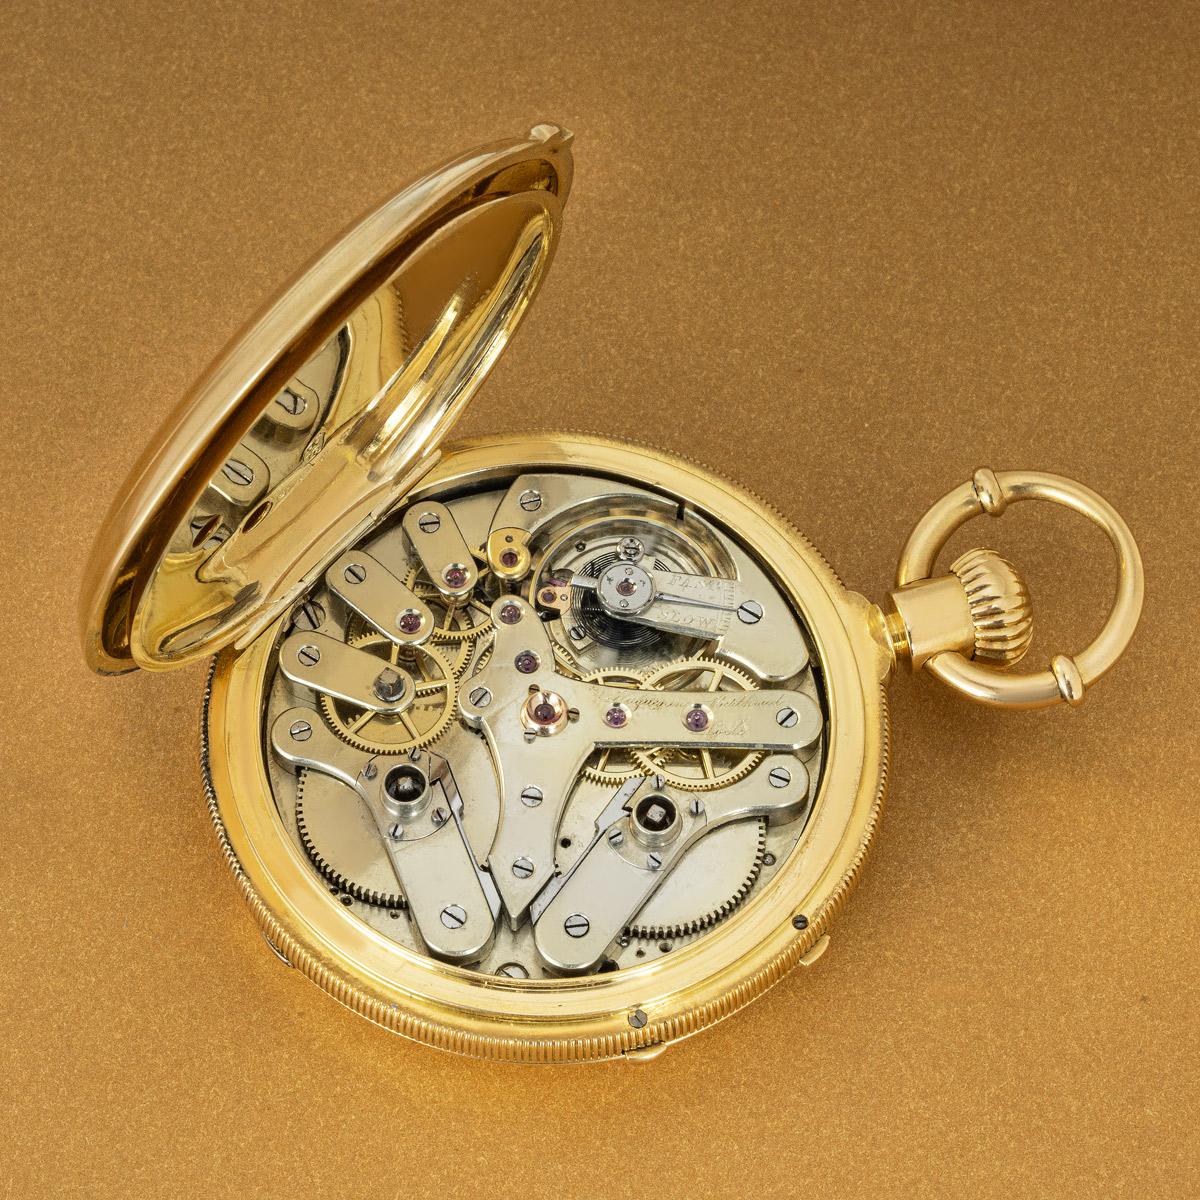 Huguenin Berthoud. A Rare Early Gold, Hunting Cased, Watch Chronograph C1860 For Sale 2